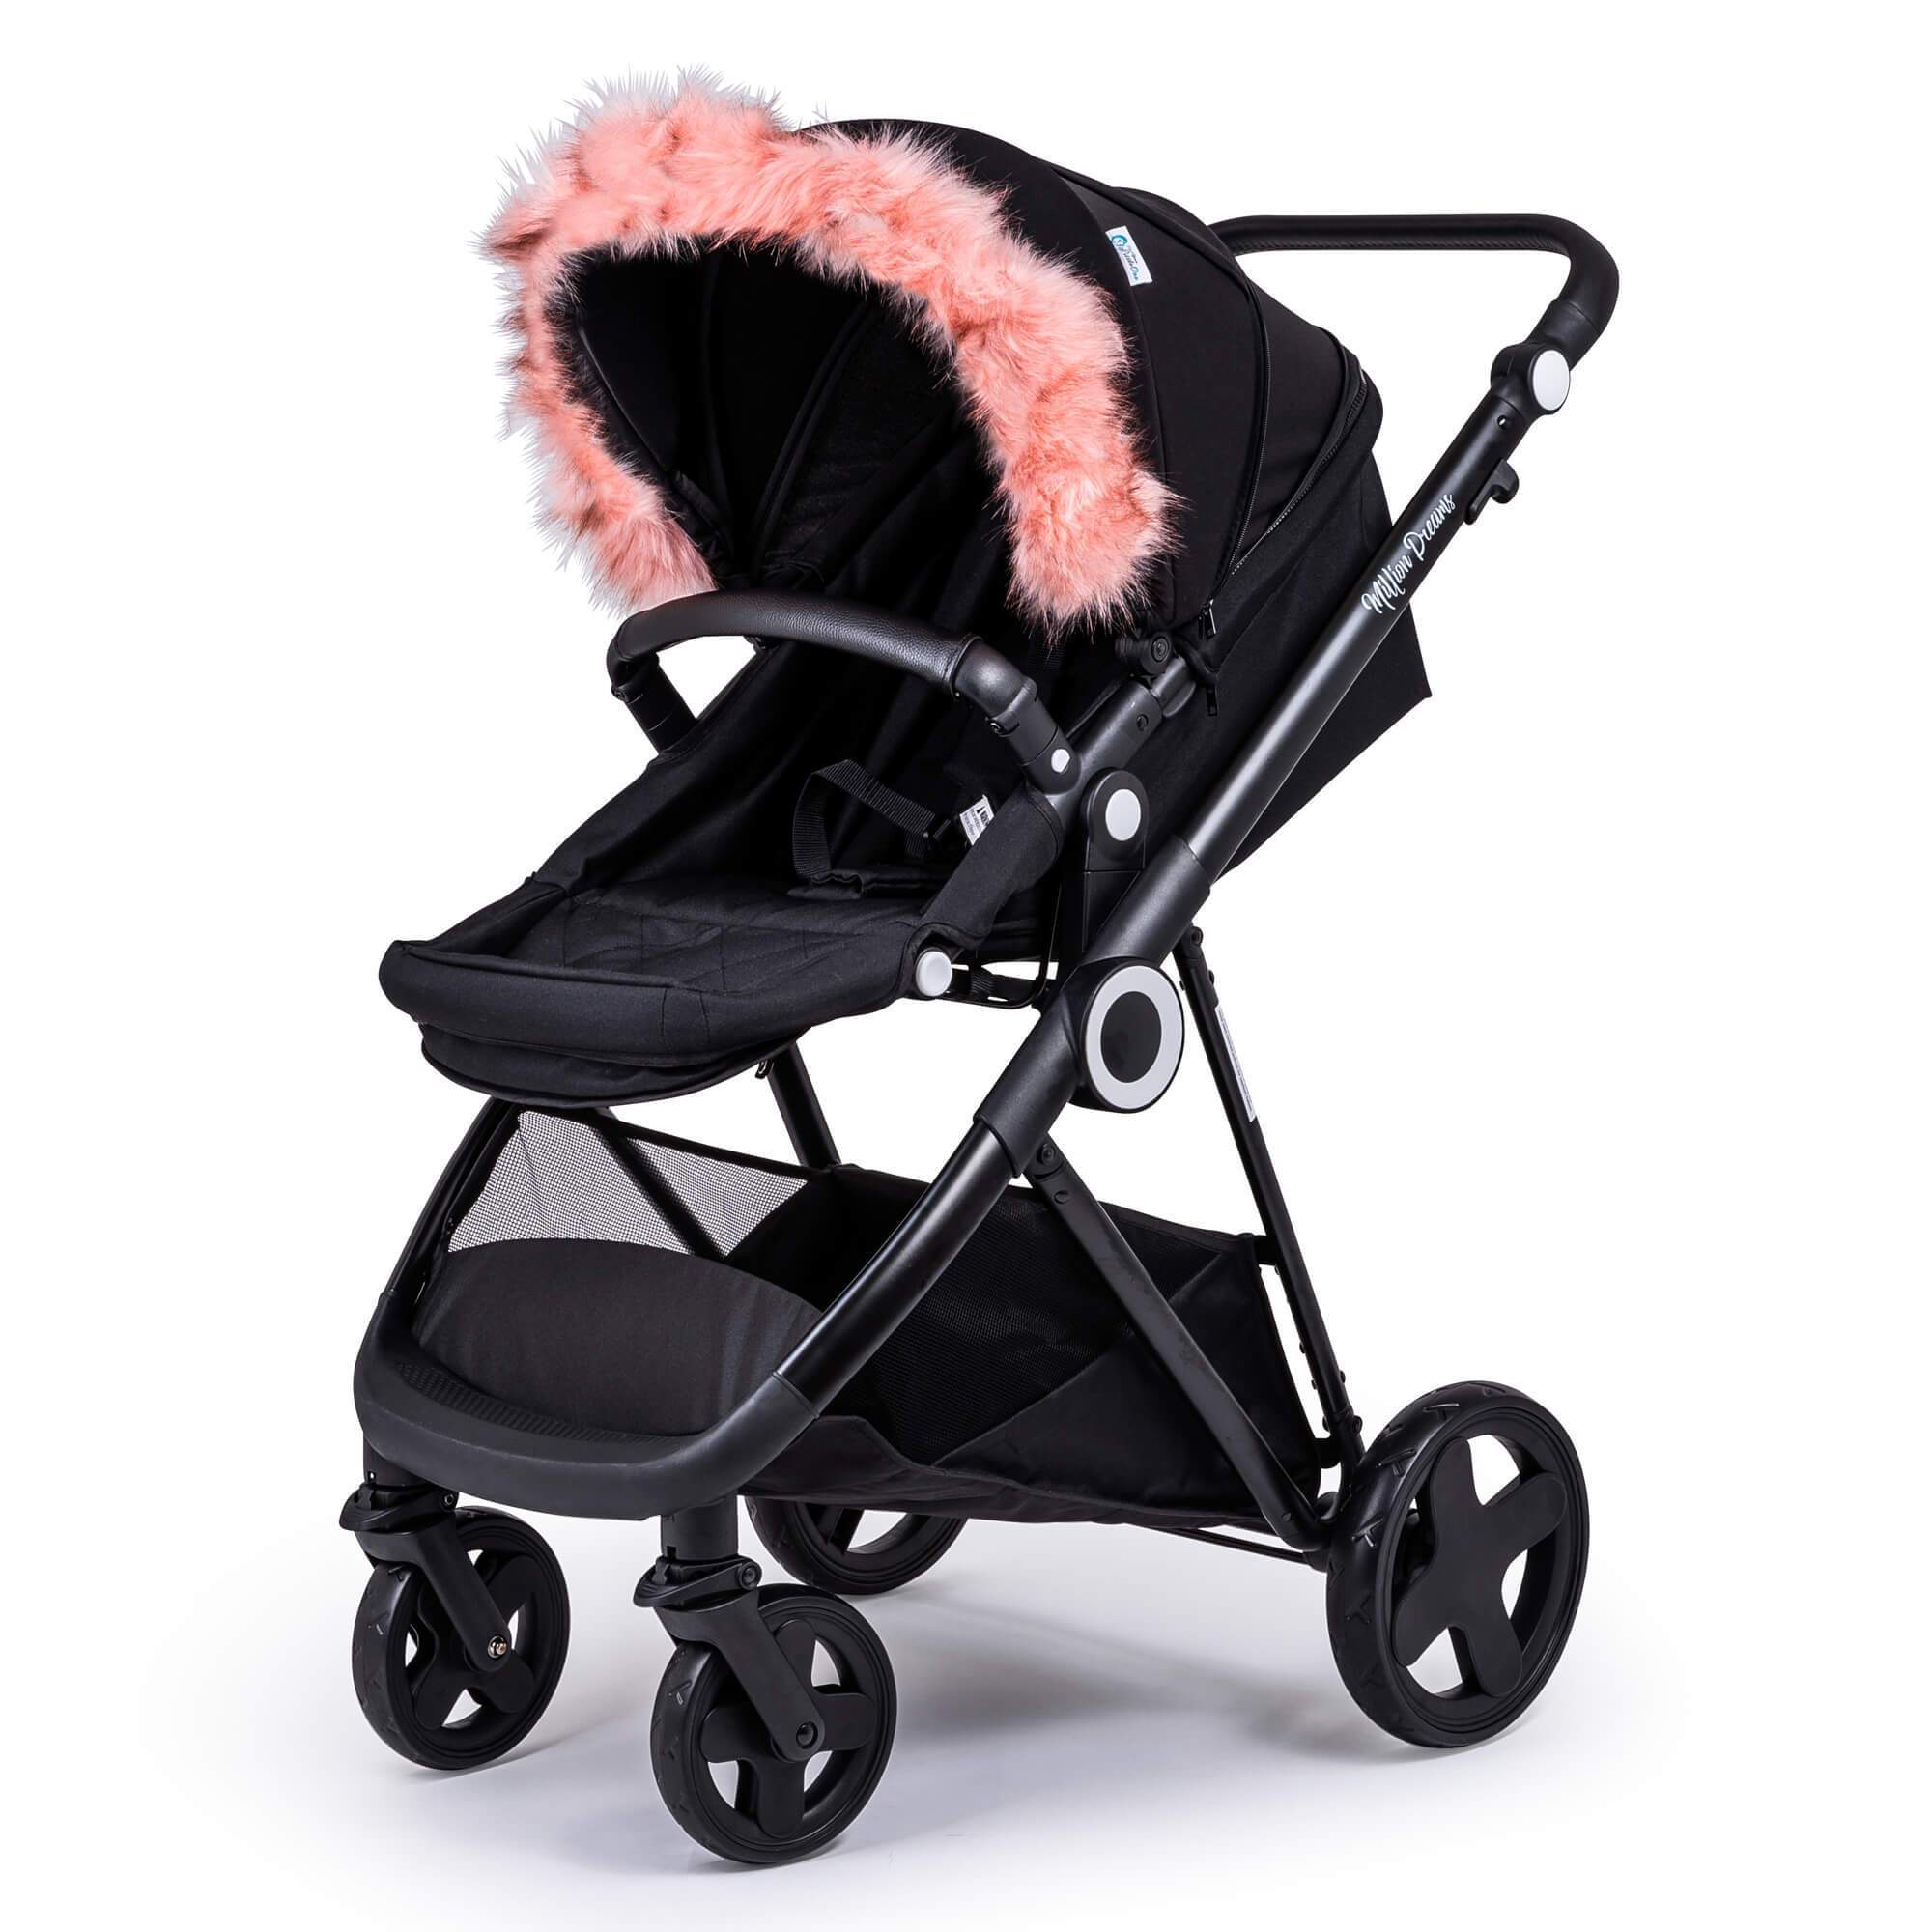 Pram Fur Hood Trim Attachment for Pushchair Compatible with BabyDan - Pink / Fits All Models | For Your Little One